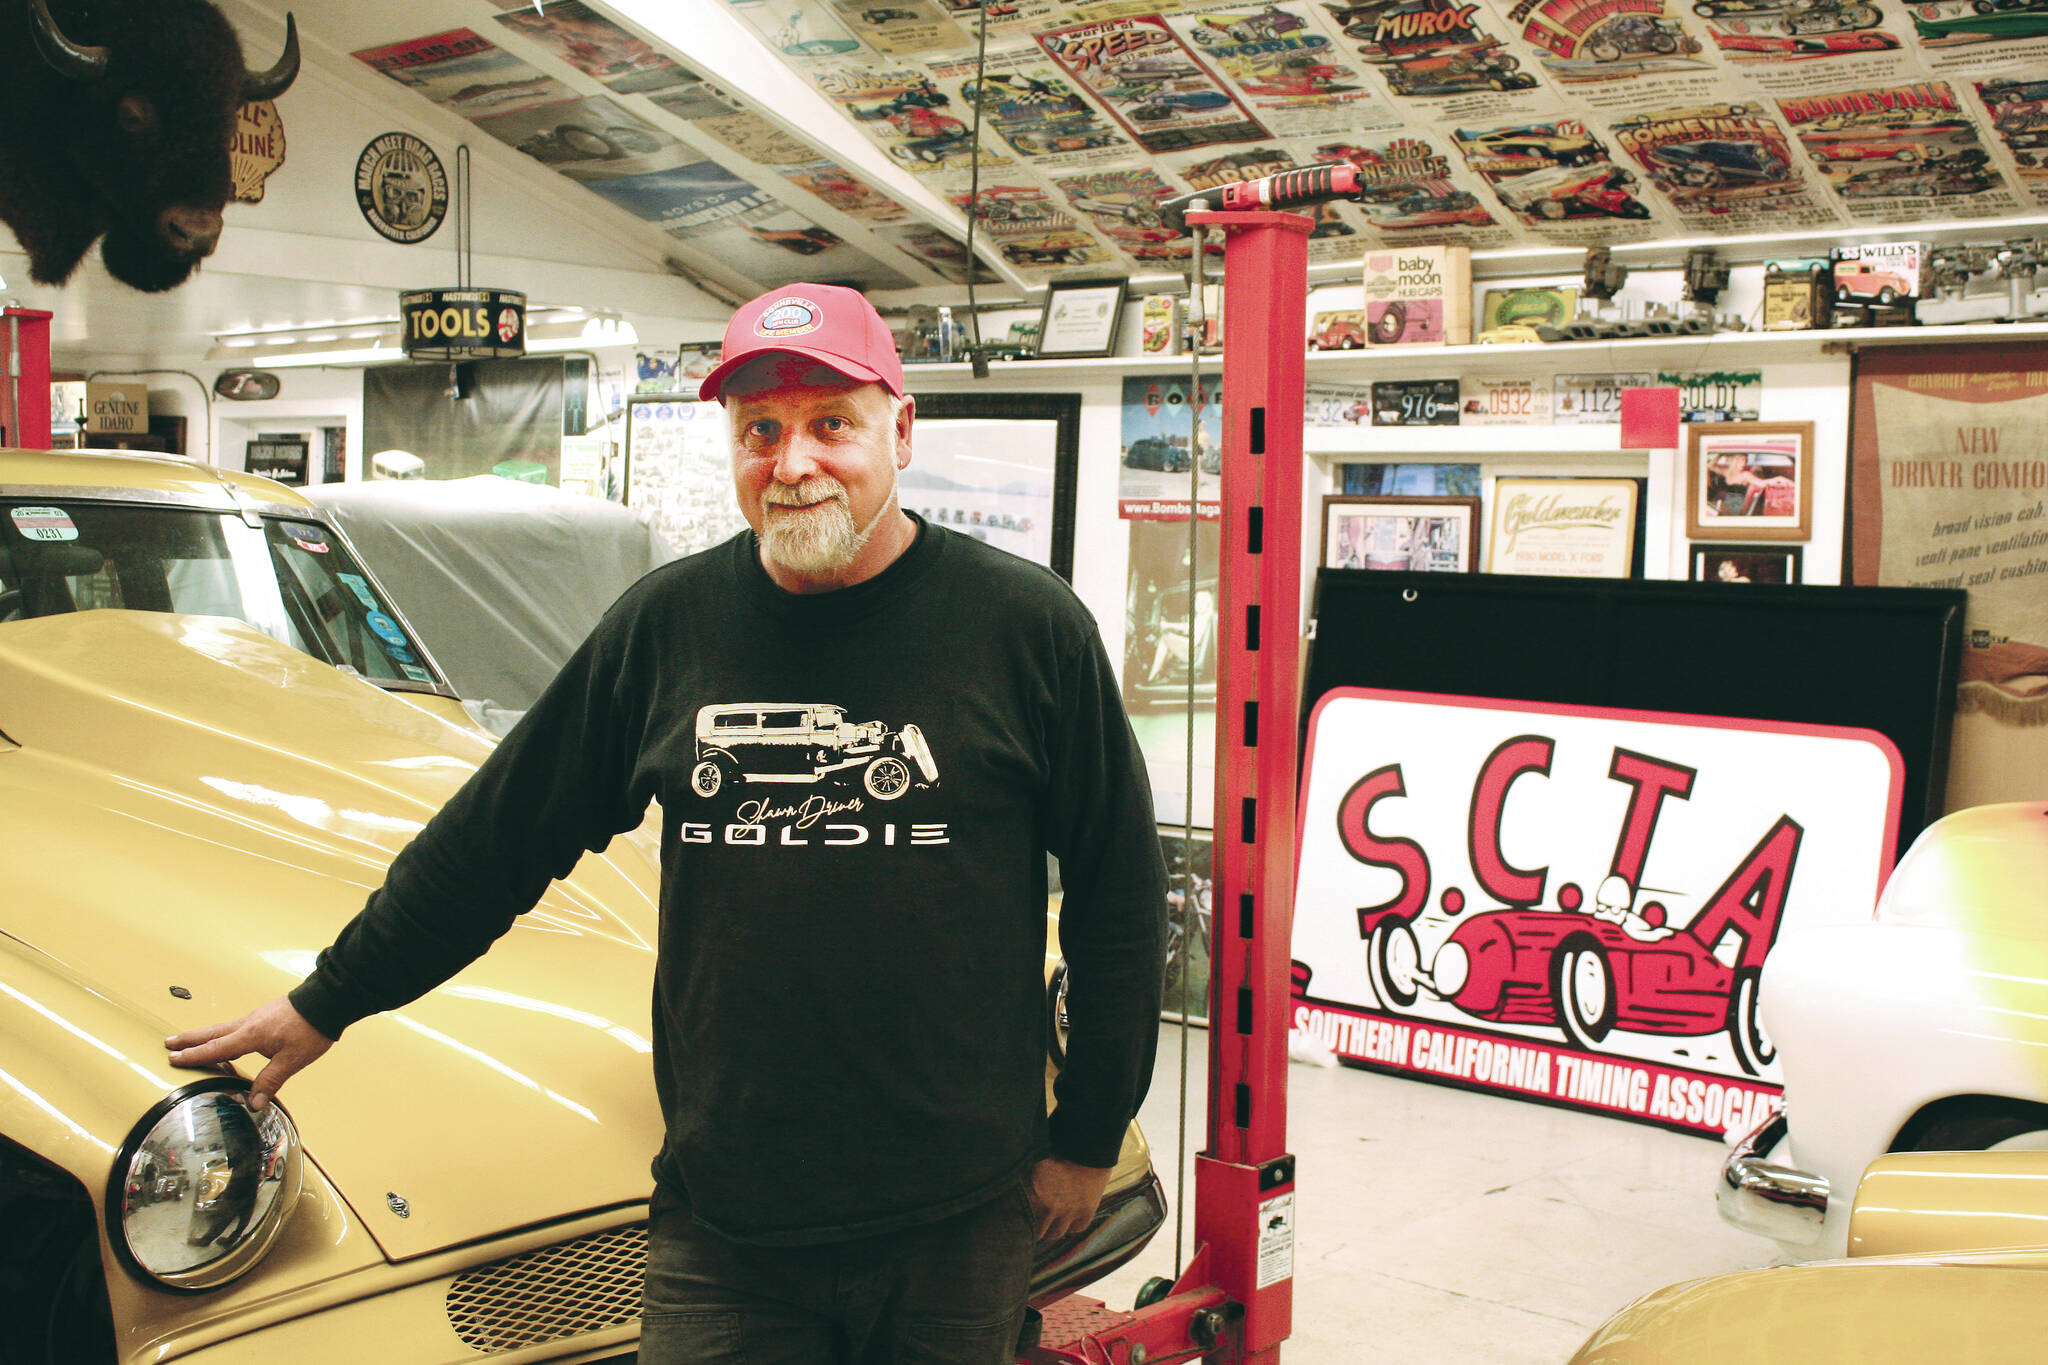 Shawn Driver proudly stands next to his car in his Sooke shop. (Bailey Moreton - Sooke News Mirror)